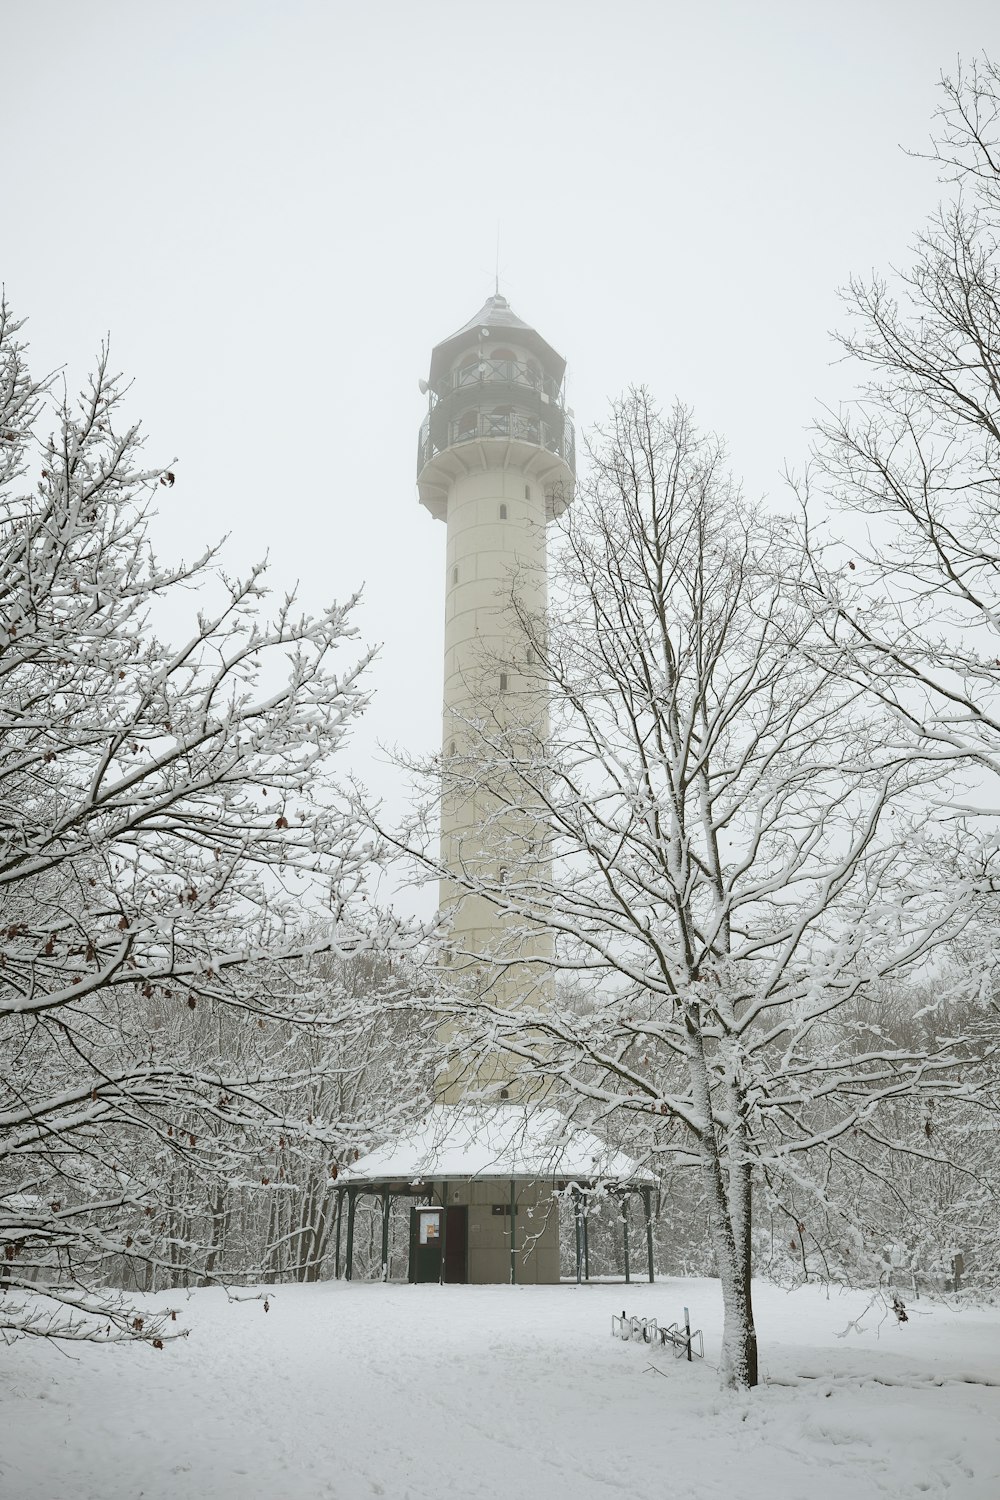 a light house in the middle of a snowy forest